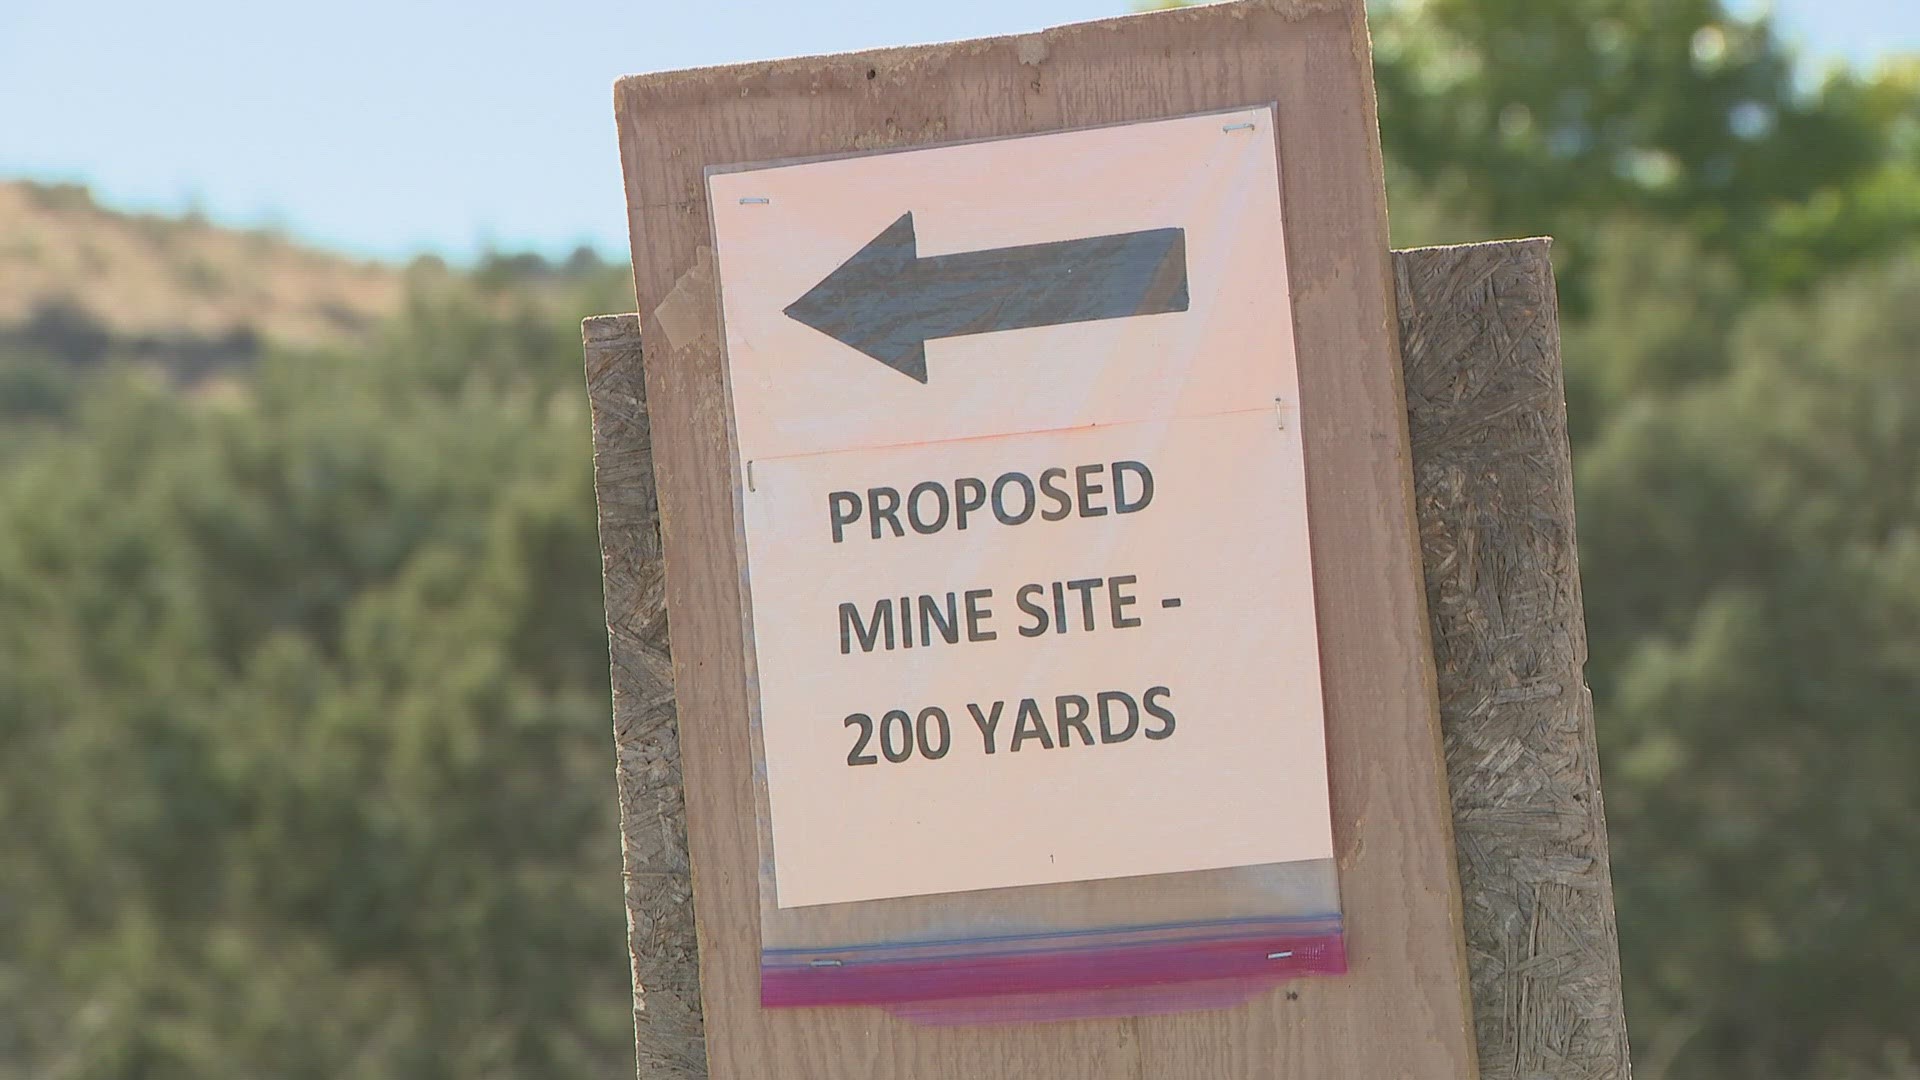 Attorney General Kris Mayes filed a temporary injunction to halt the development of a mine operation in the middle of a Chino Valley neighborhood.